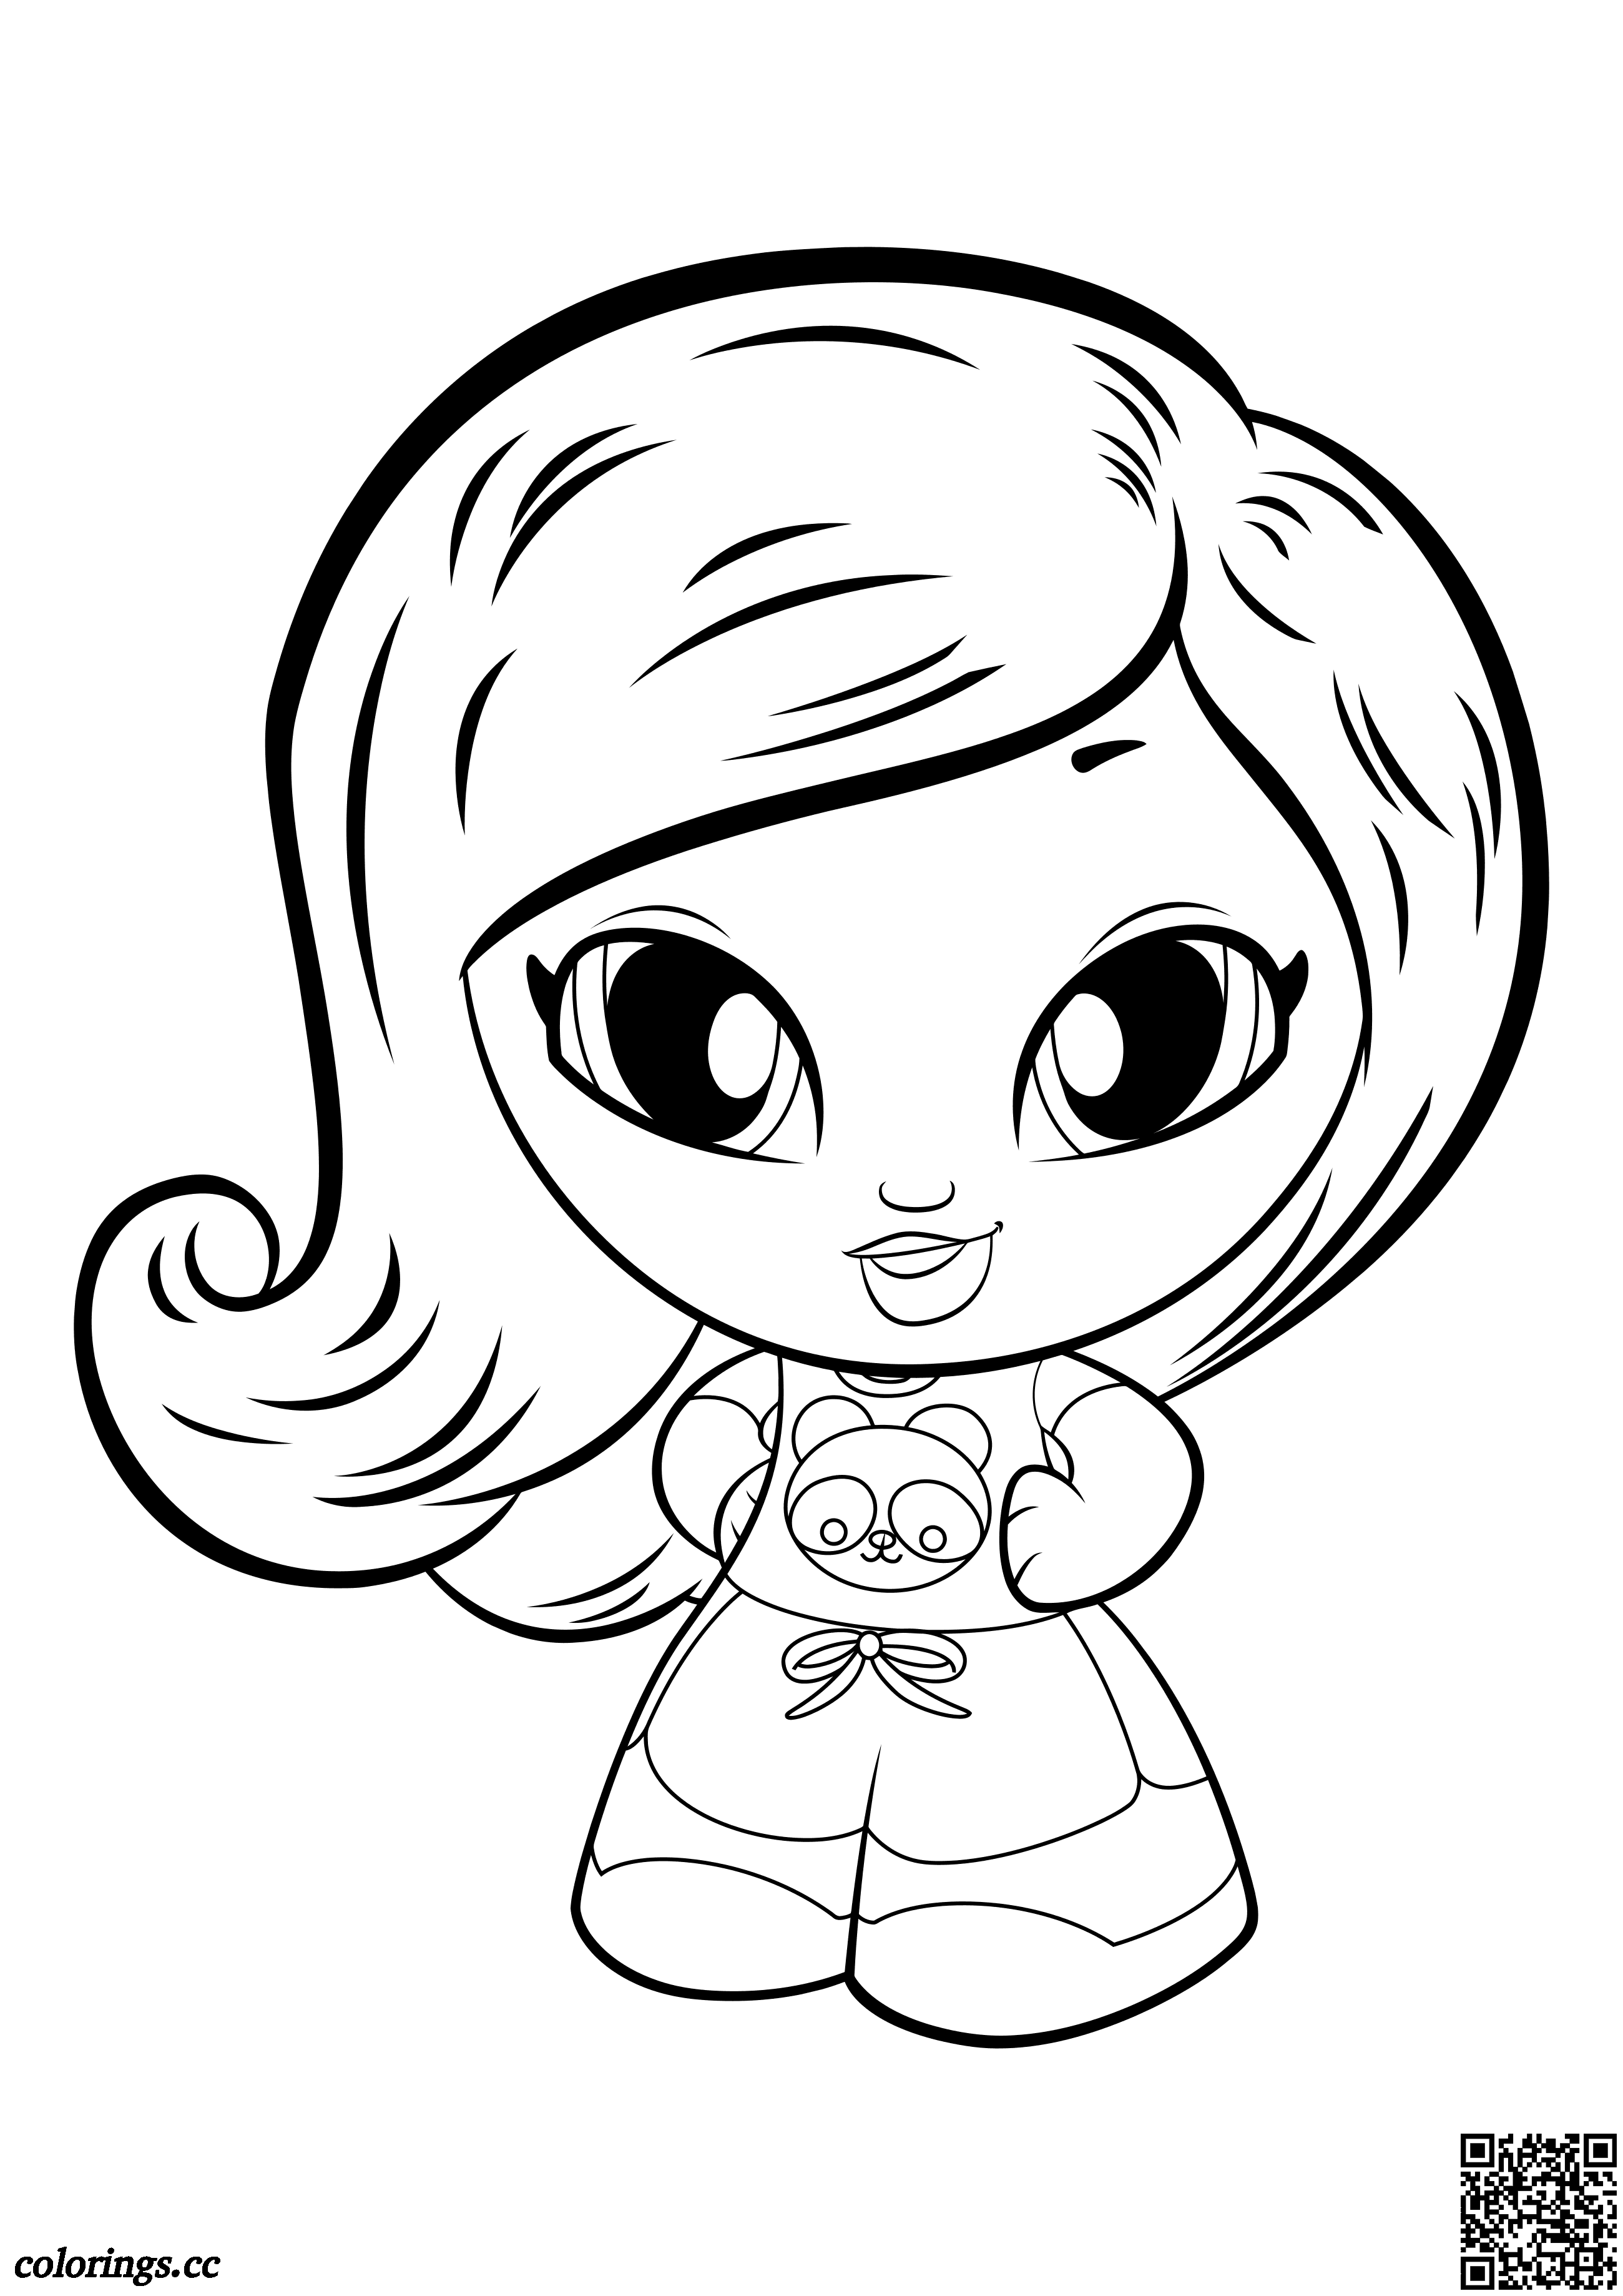 Zhen Zhen coloring pages, Dolls Gift Ems coloring pages - Colorings.cc